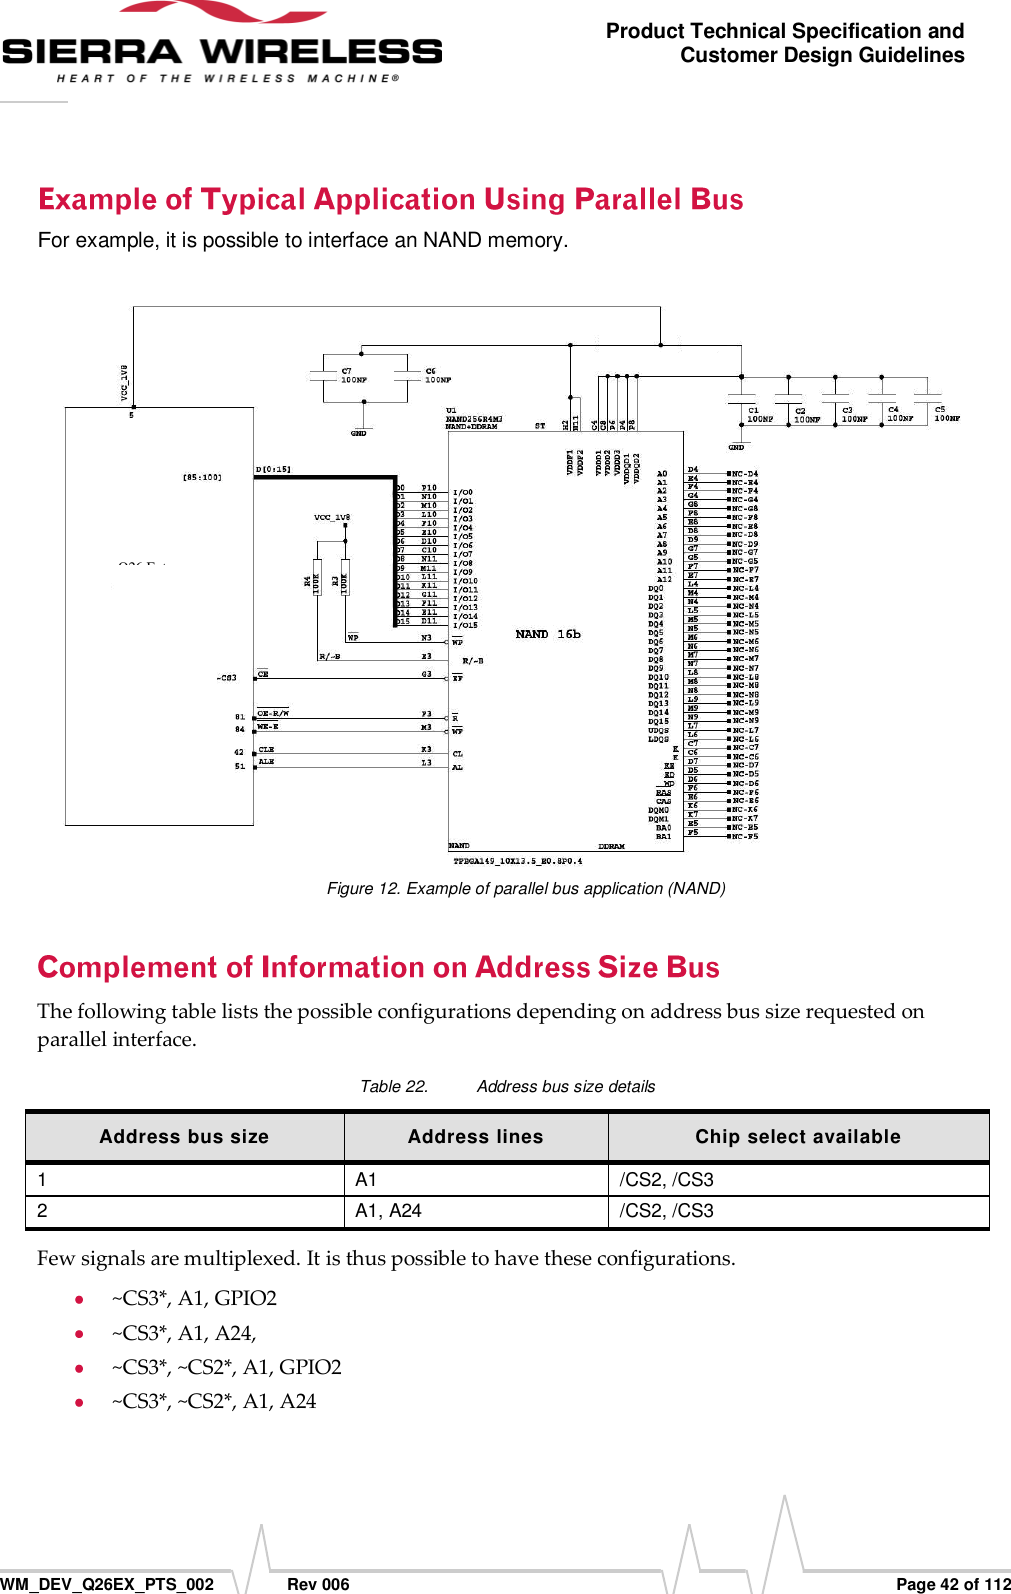      WM_DEV_Q26EX_PTS_002  Rev 006  Page 42 of 112 Product Technical Specification and Customer Design Guidelines For example, it is possible to interface an NAND memory.  Figure 12. Example of parallel bus application (NAND) The following table lists the possible configurations depending on address bus size requested on parallel interface. Table 22.  Address bus size details Address bus size Address lines Chip select available 1 A1 /CS2, /CS3 2 A1, A24 /CS2, /CS3 Few signals are multiplexed. It is thus possible to have these configurations.   ~CS3*, A1, GPIO2  ~CS3*, A1, A24,   ~CS3*, ~CS2*, A1, GPIO2  ~CS3*, ~CS2*, A1, A24 Q26 Extrene                             